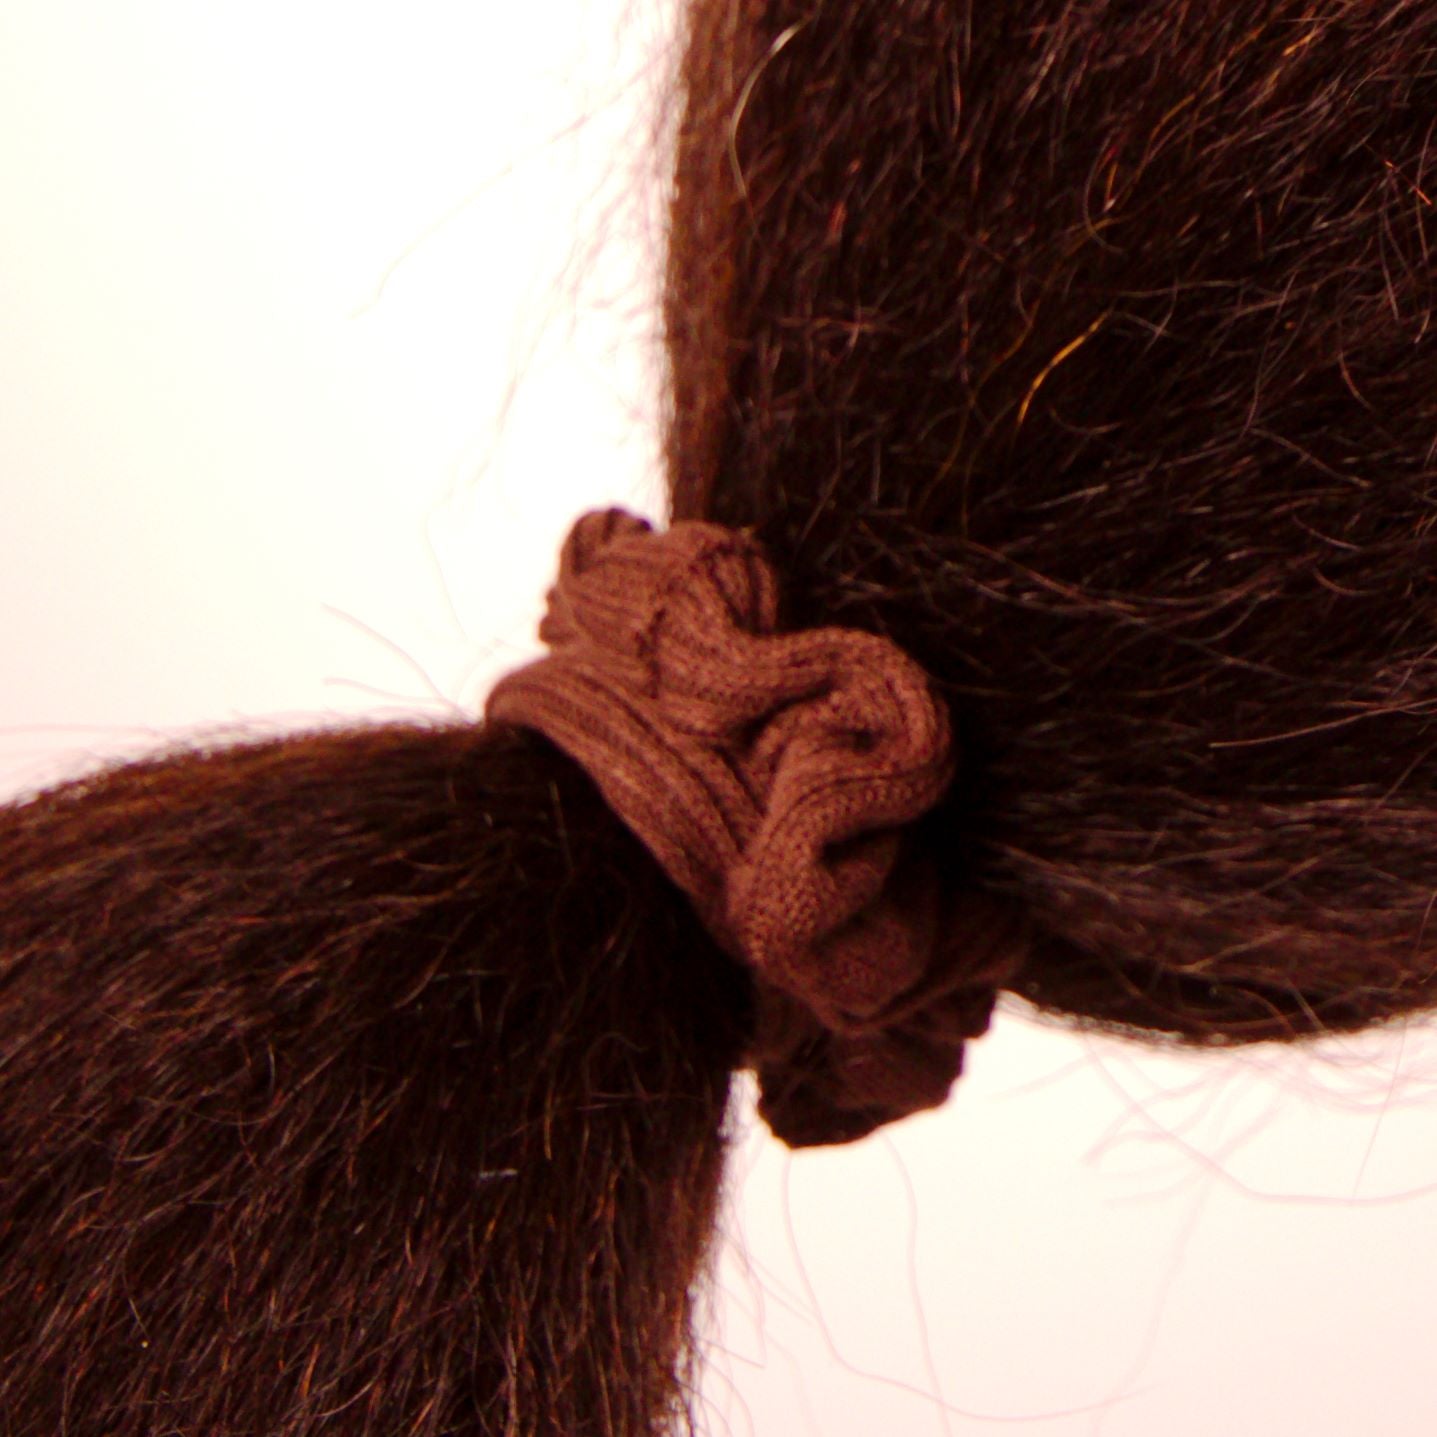 Amelia Beauty, Medium Brown Ribbed Scrunchies, 2.5in Diameter, Gentle on Hair, Strong Hold, No Snag, No Dents or Creases. 10 Pack